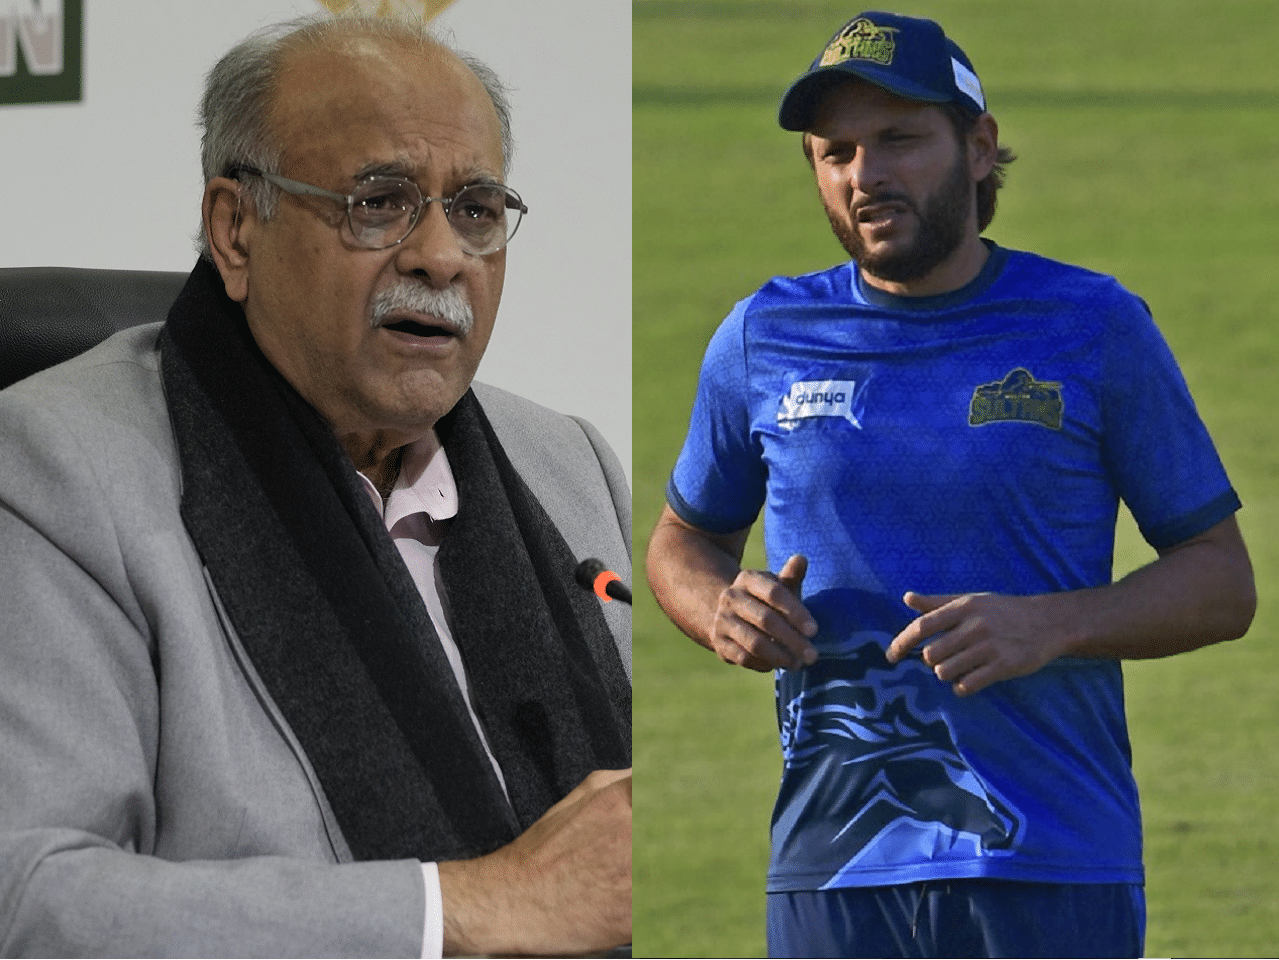 ‘The decision is not Shahid Afridi’s’: PCB chief hits back at ex-Pakistan captain over his ‘tight slap to BCCI’ remark